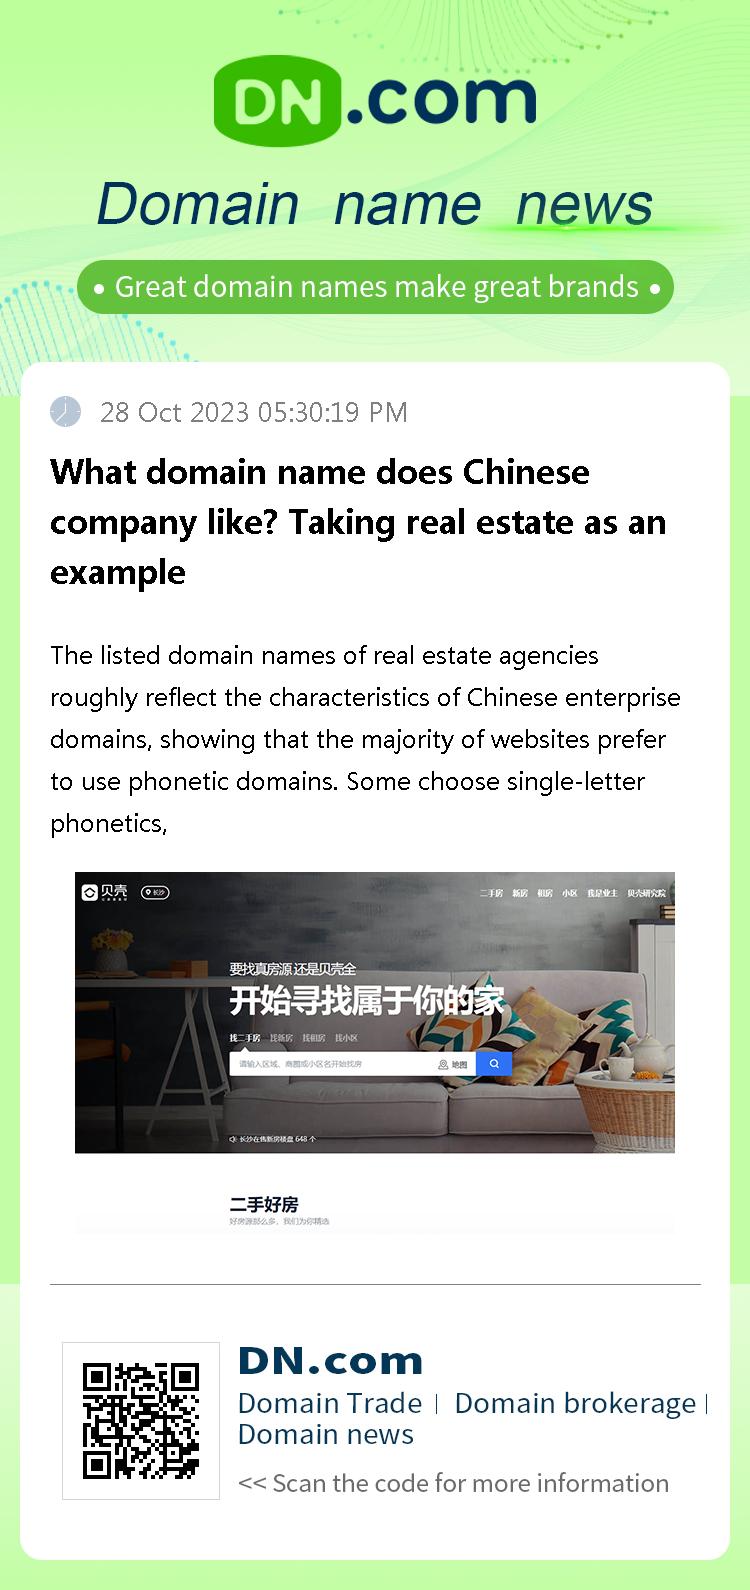 What domain name does Chinese company like? Taking real estate as an example